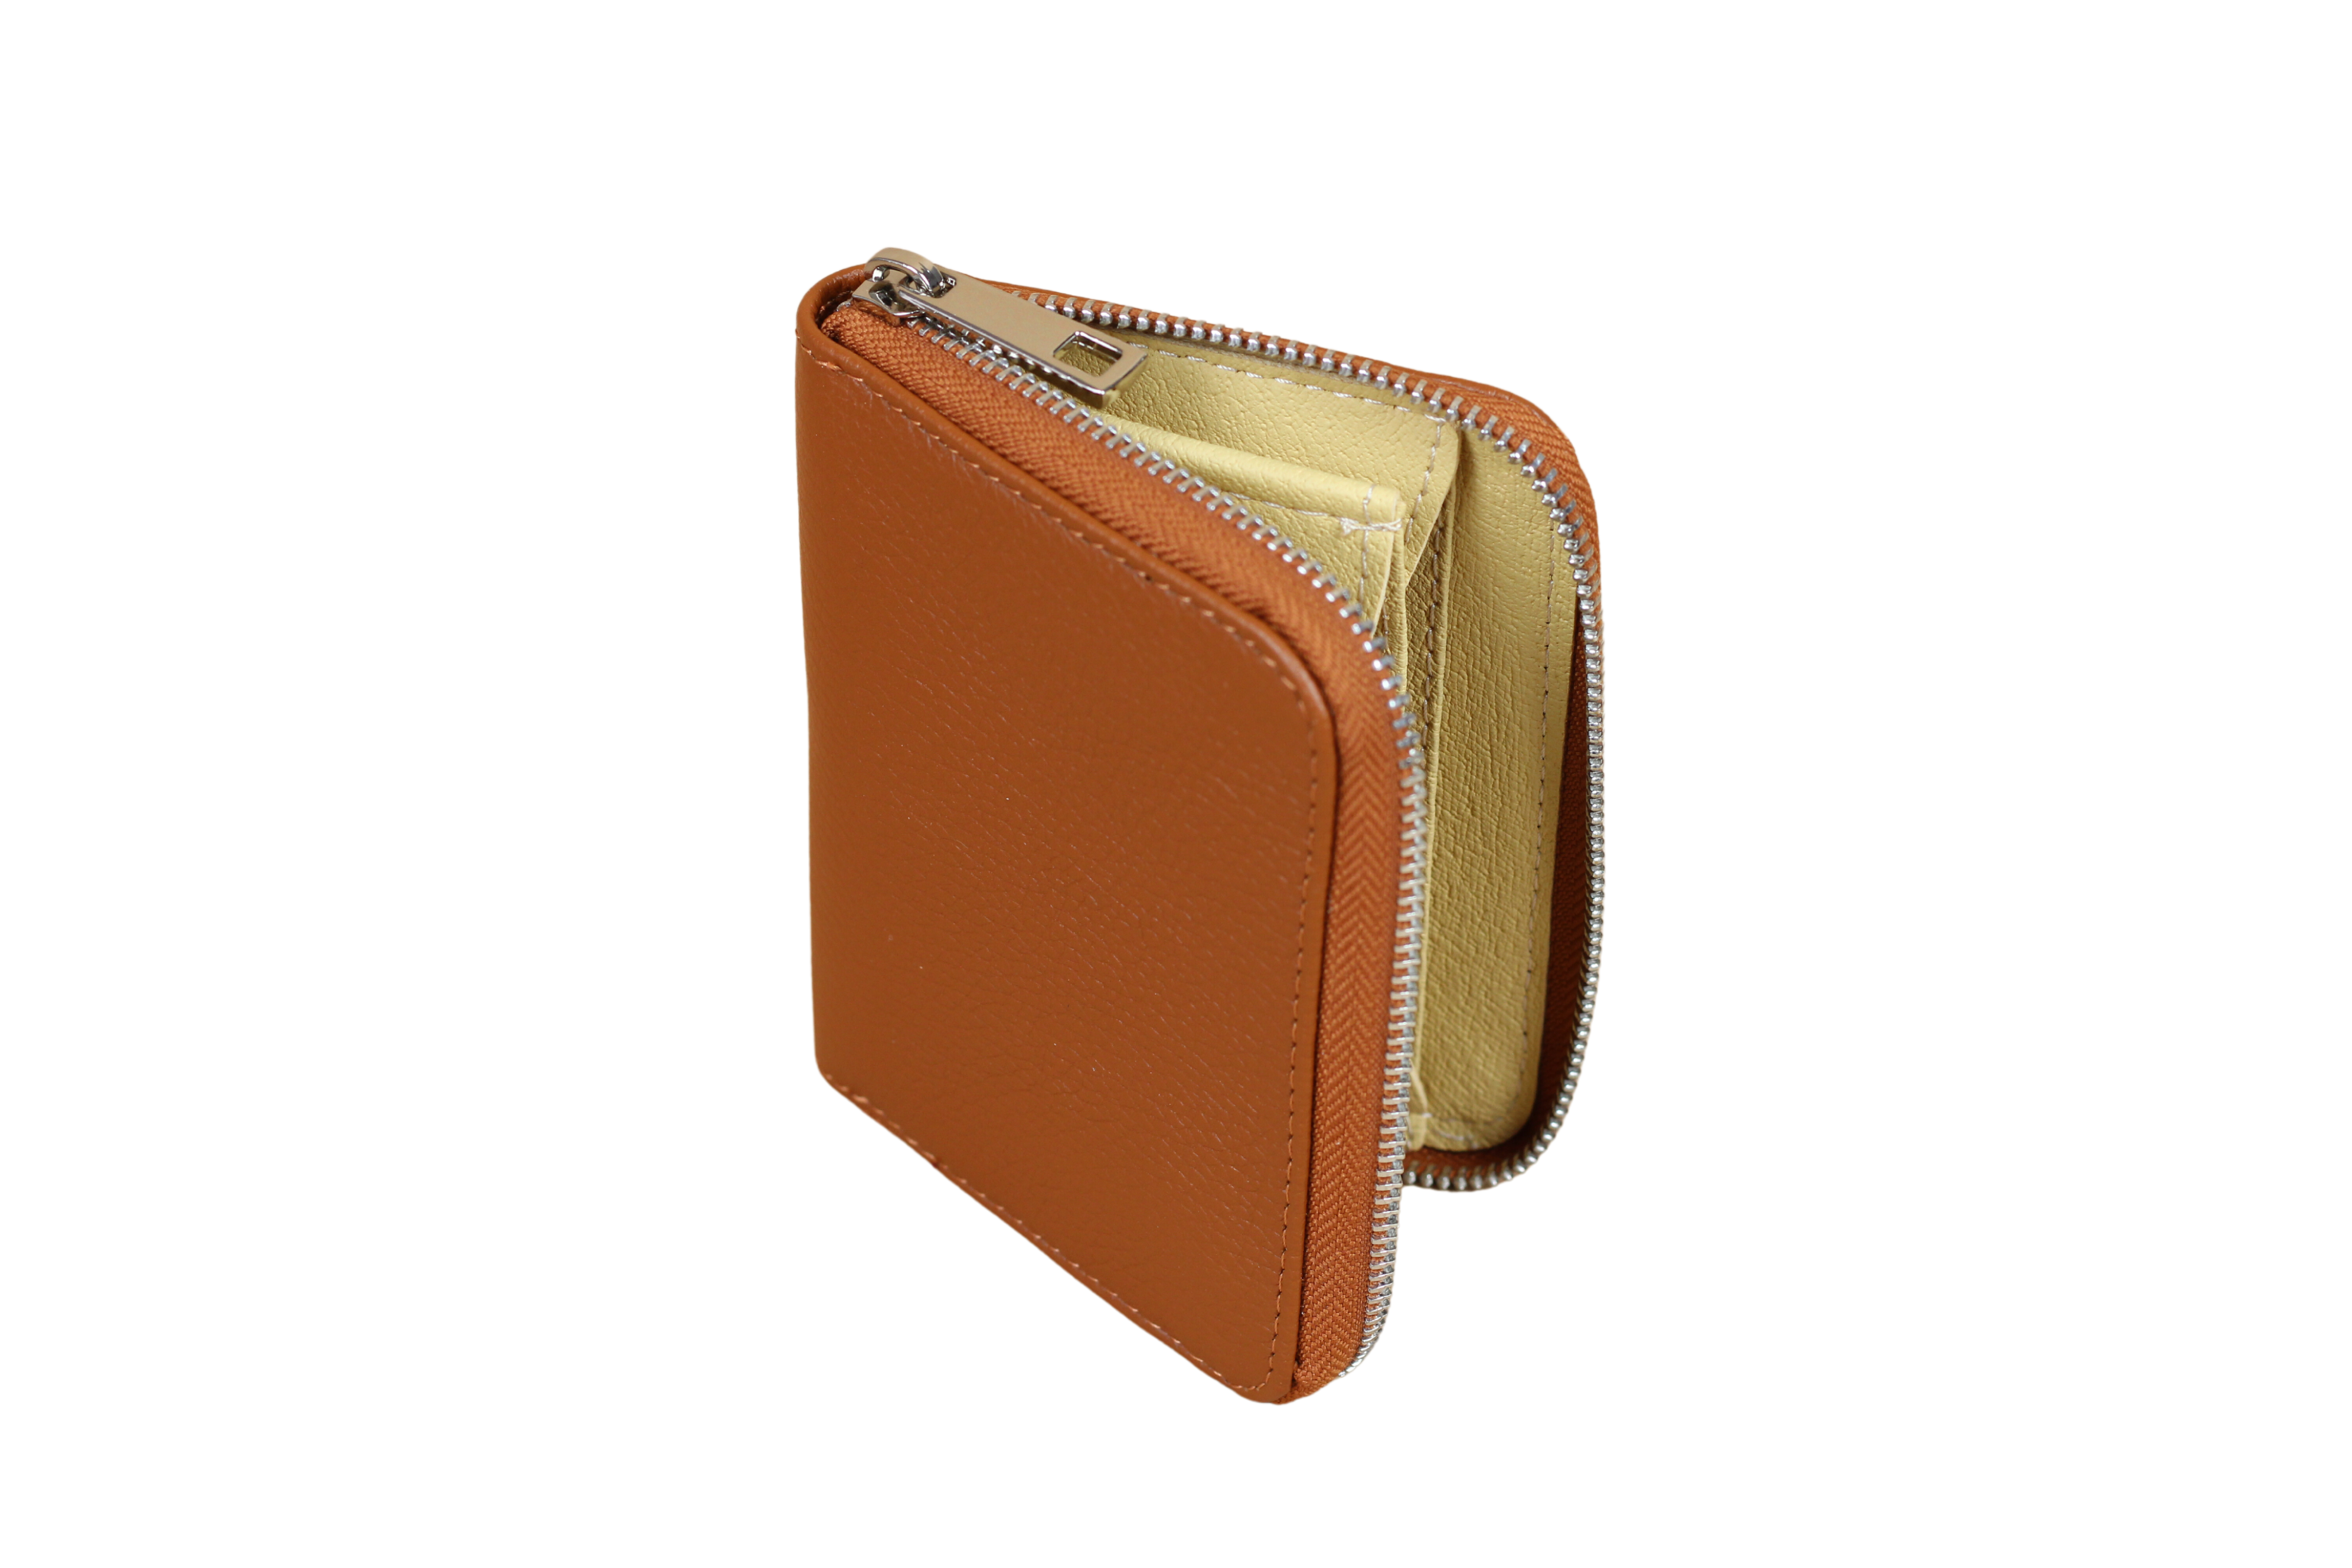 Small wallet made of soft leather with credit card slots